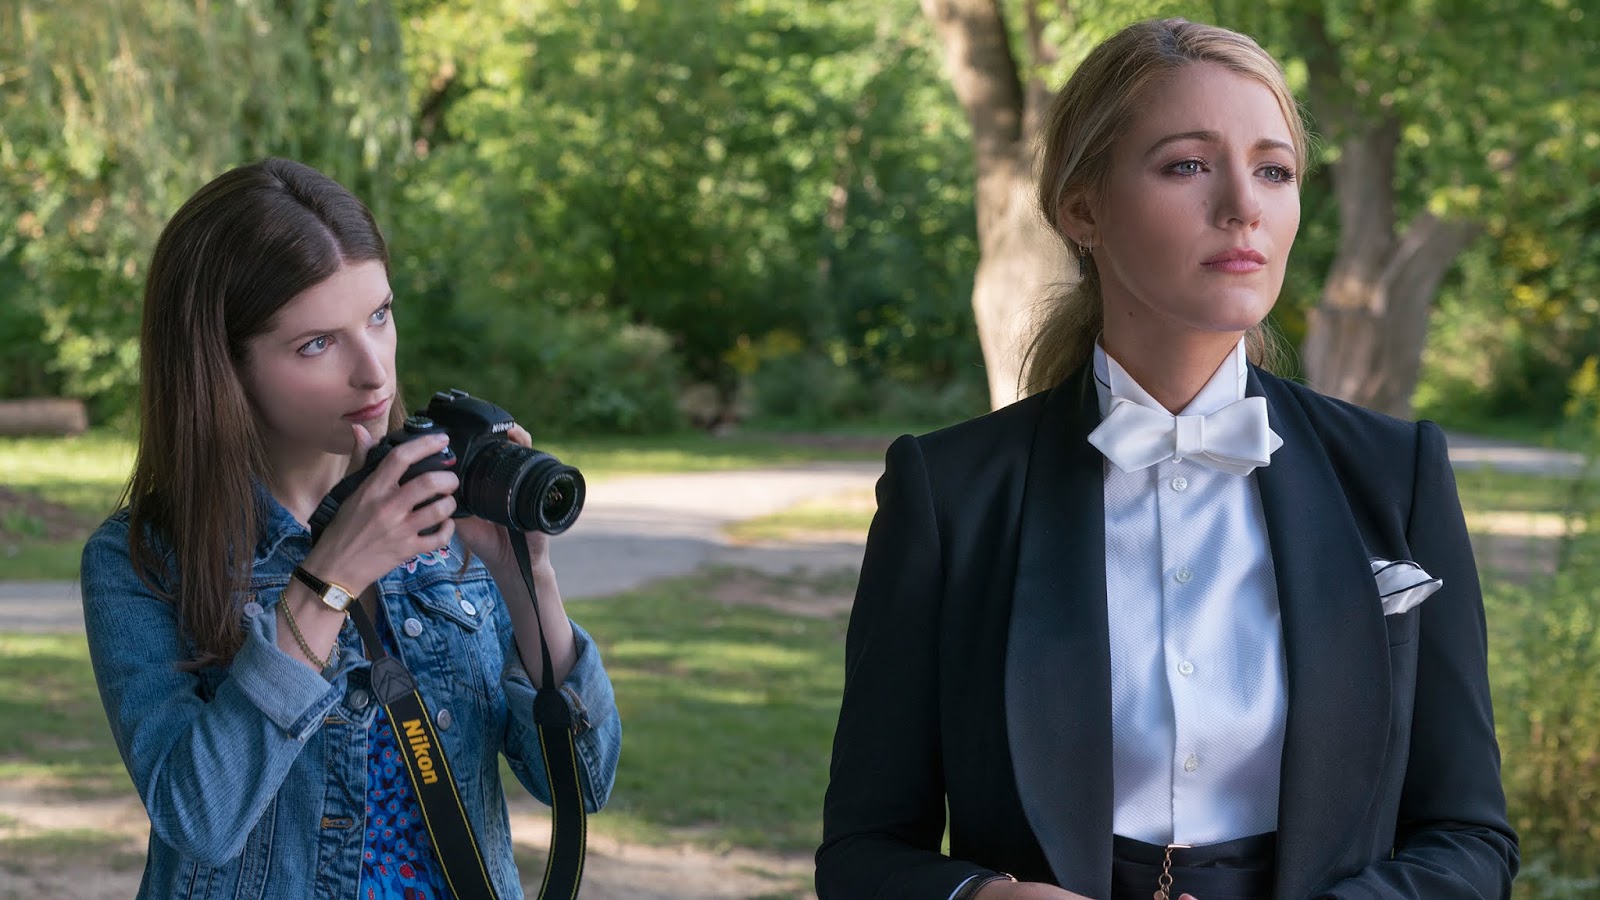 MOVIES: A Simple Favor - Review